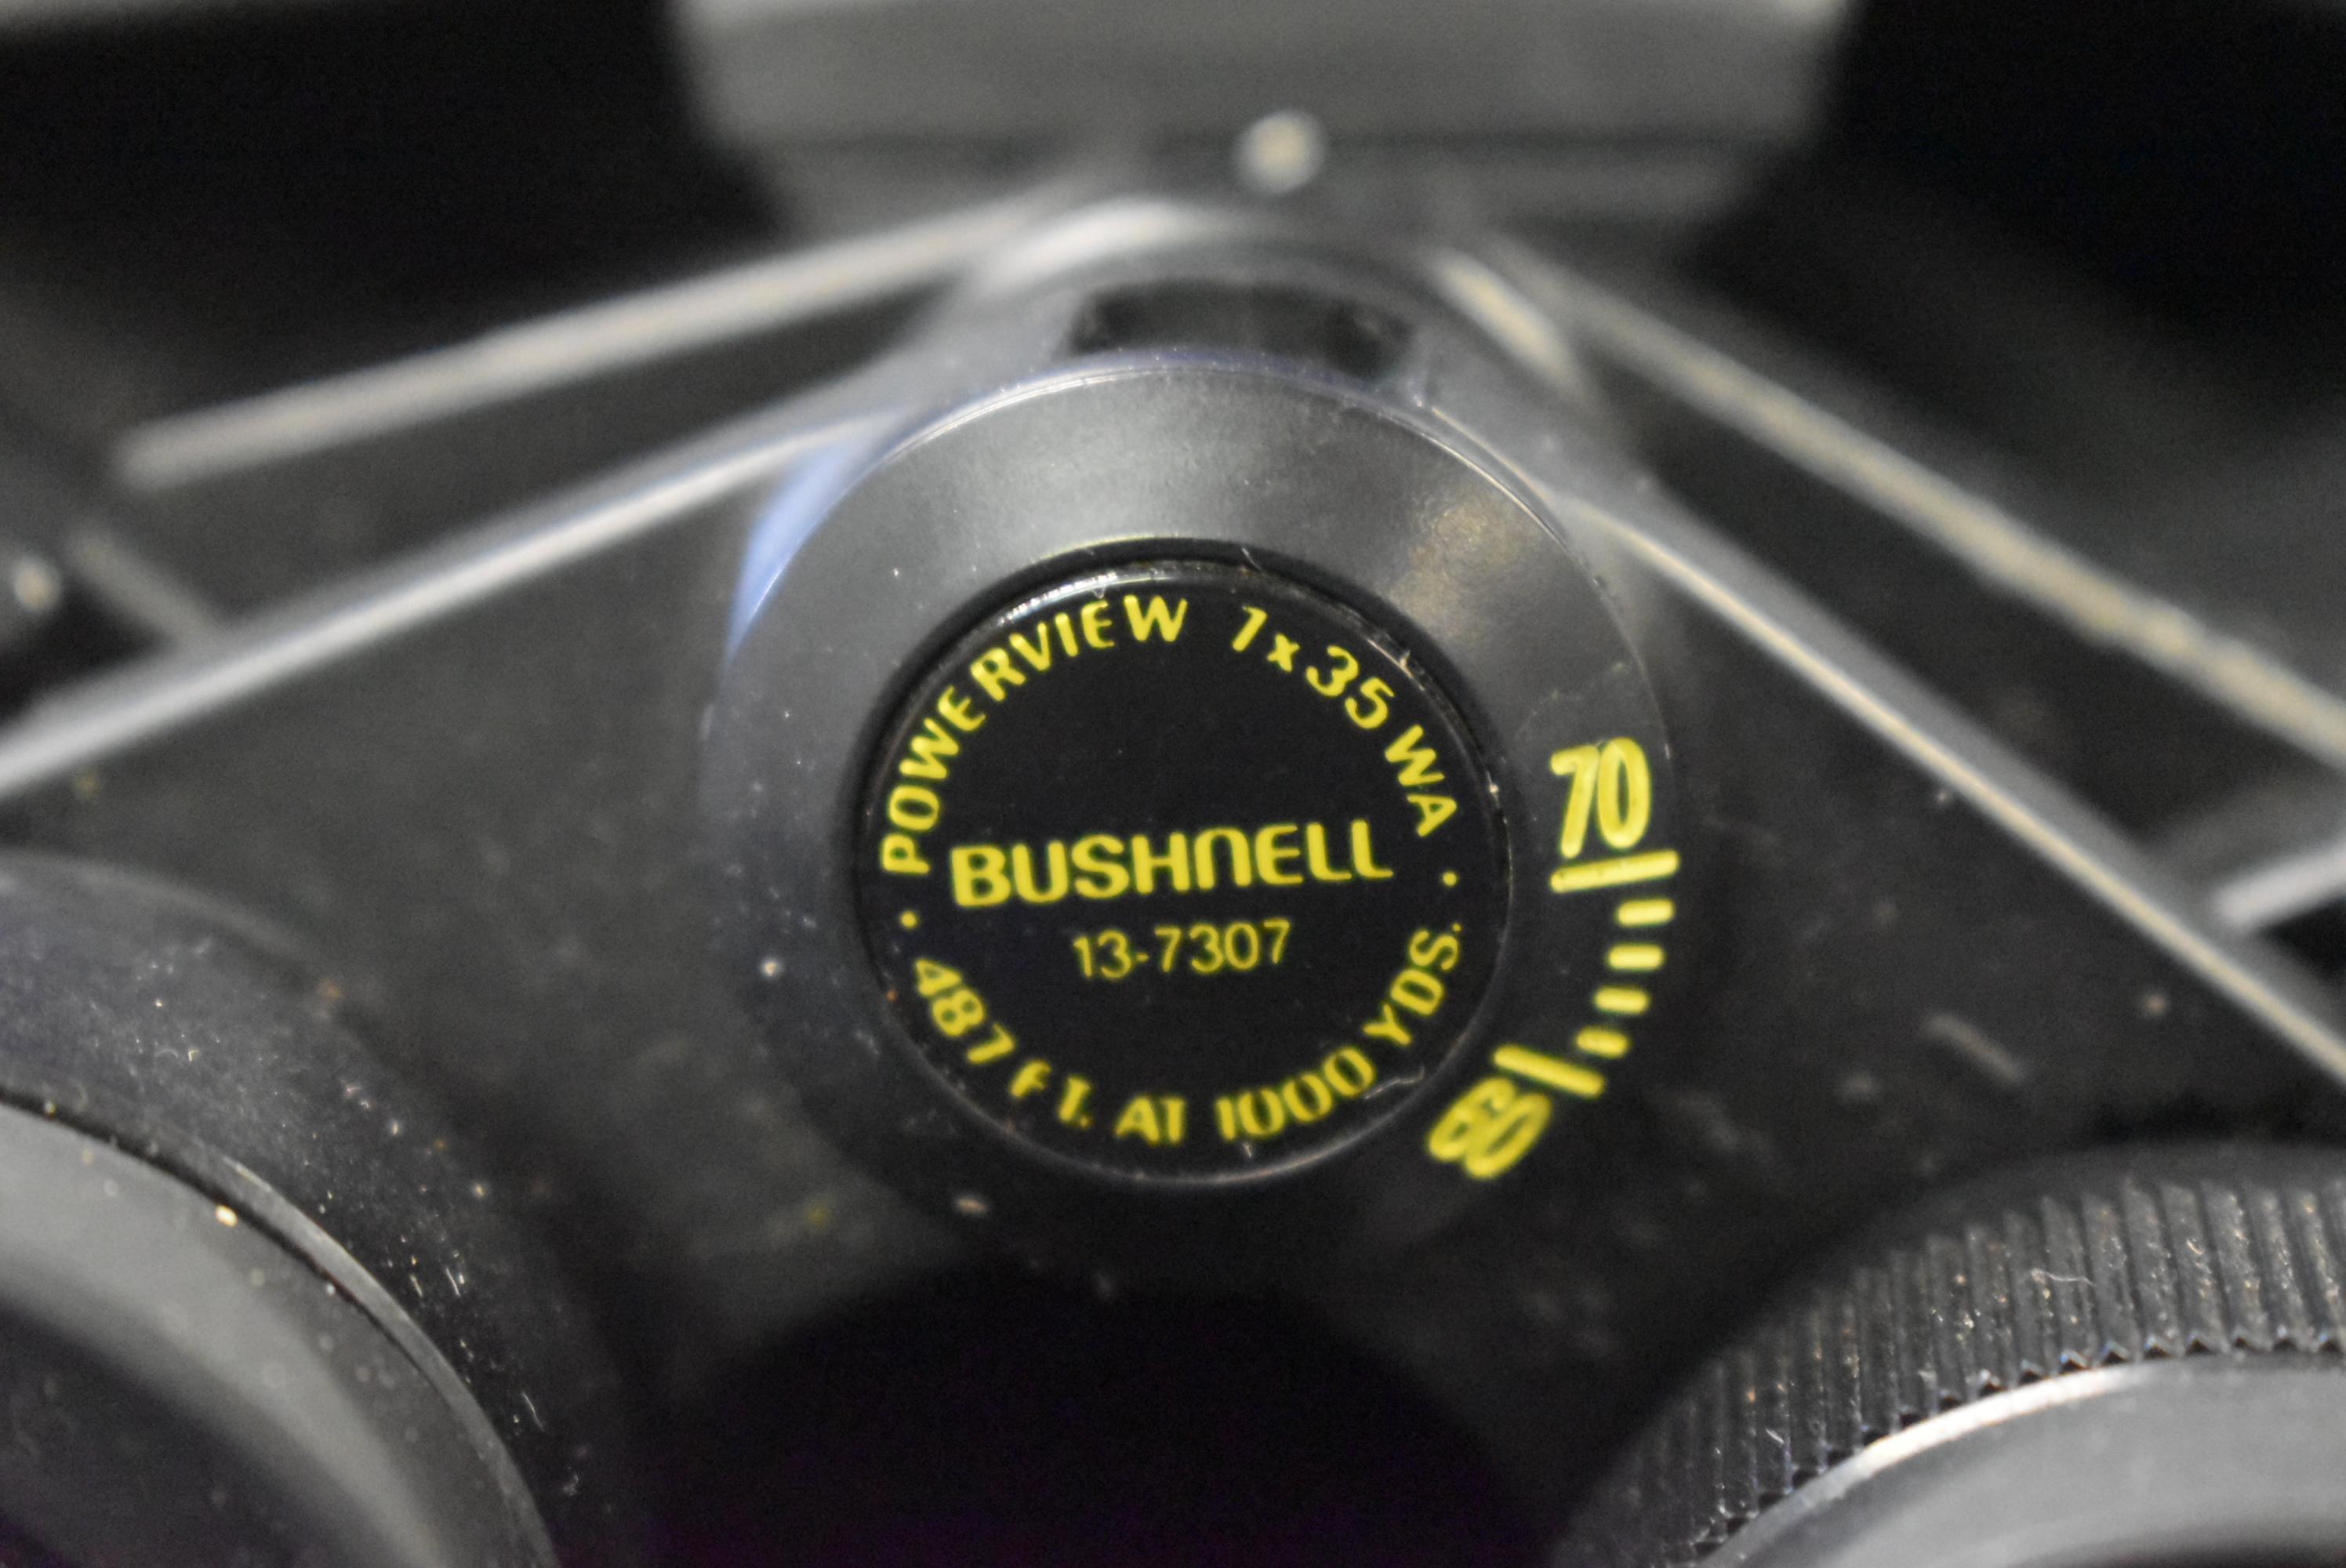 BUSHNELL AND CALDWELL DUO!